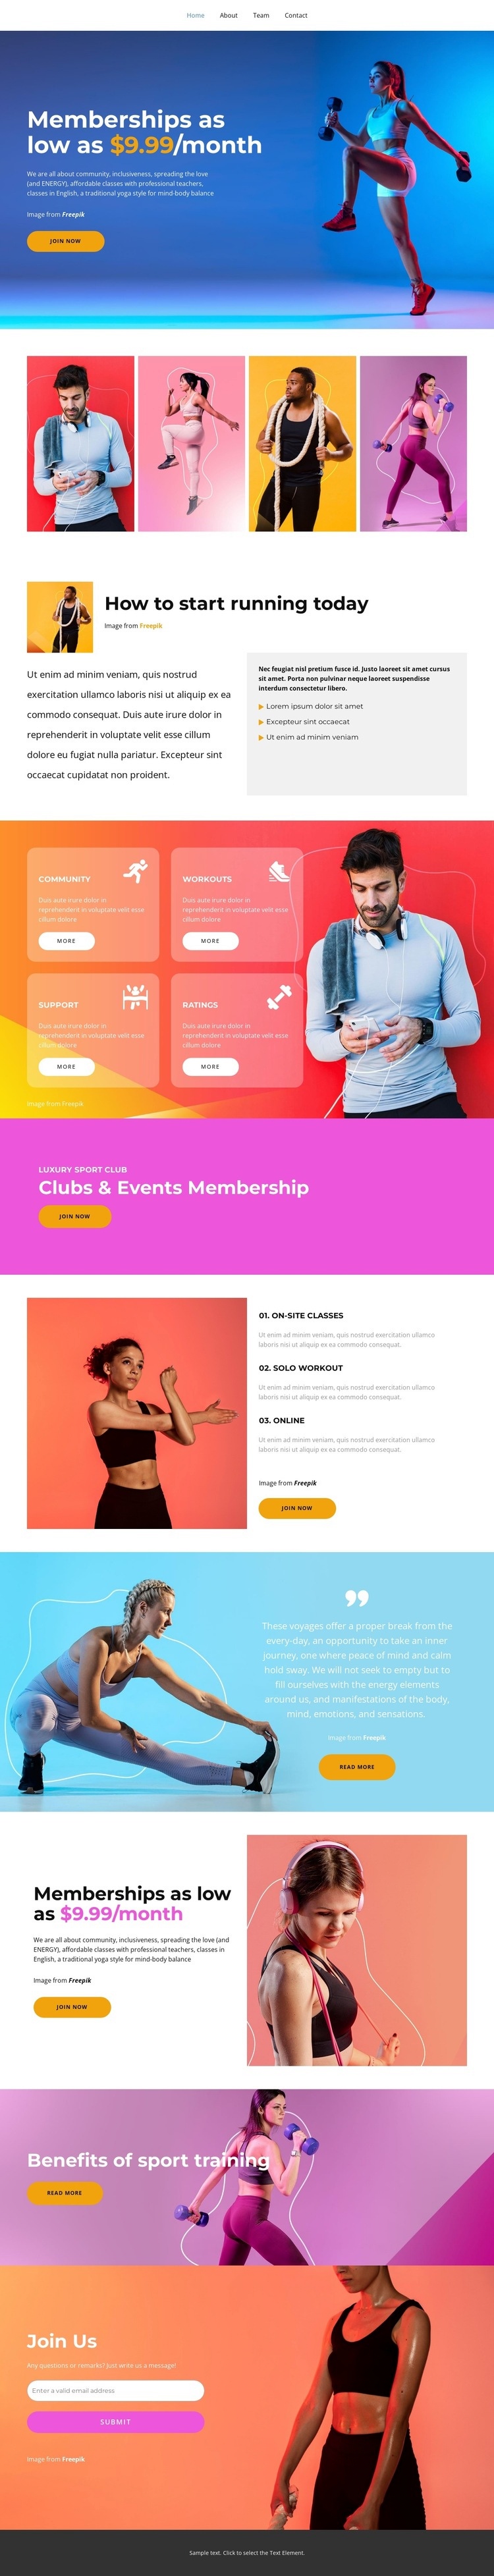 We are a sport club Homepage Design